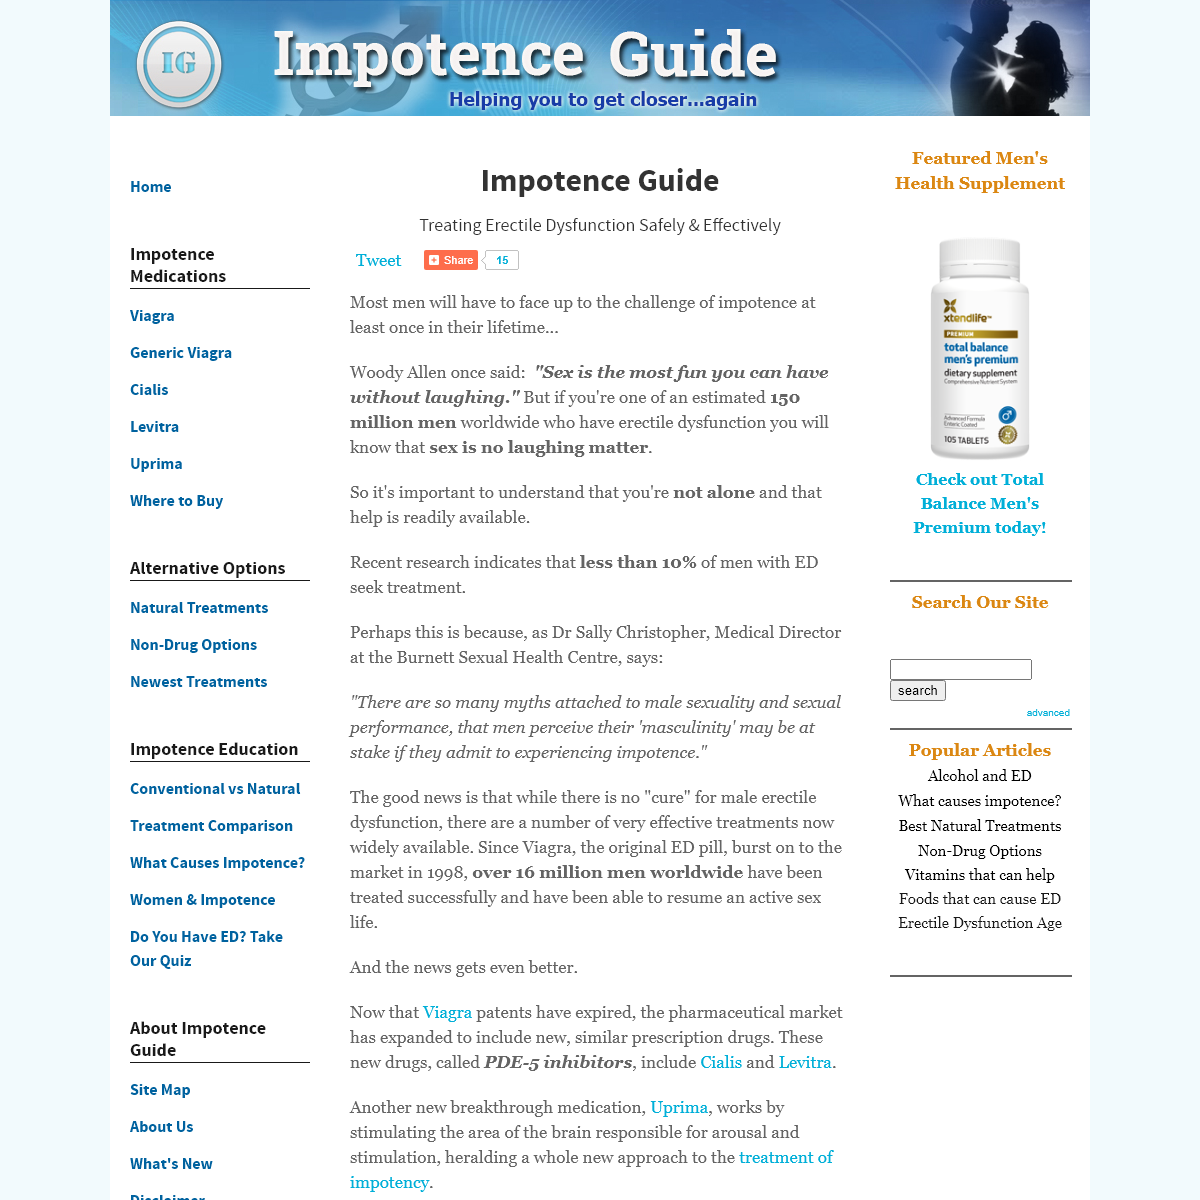 A complete backup of impotence-guide.com